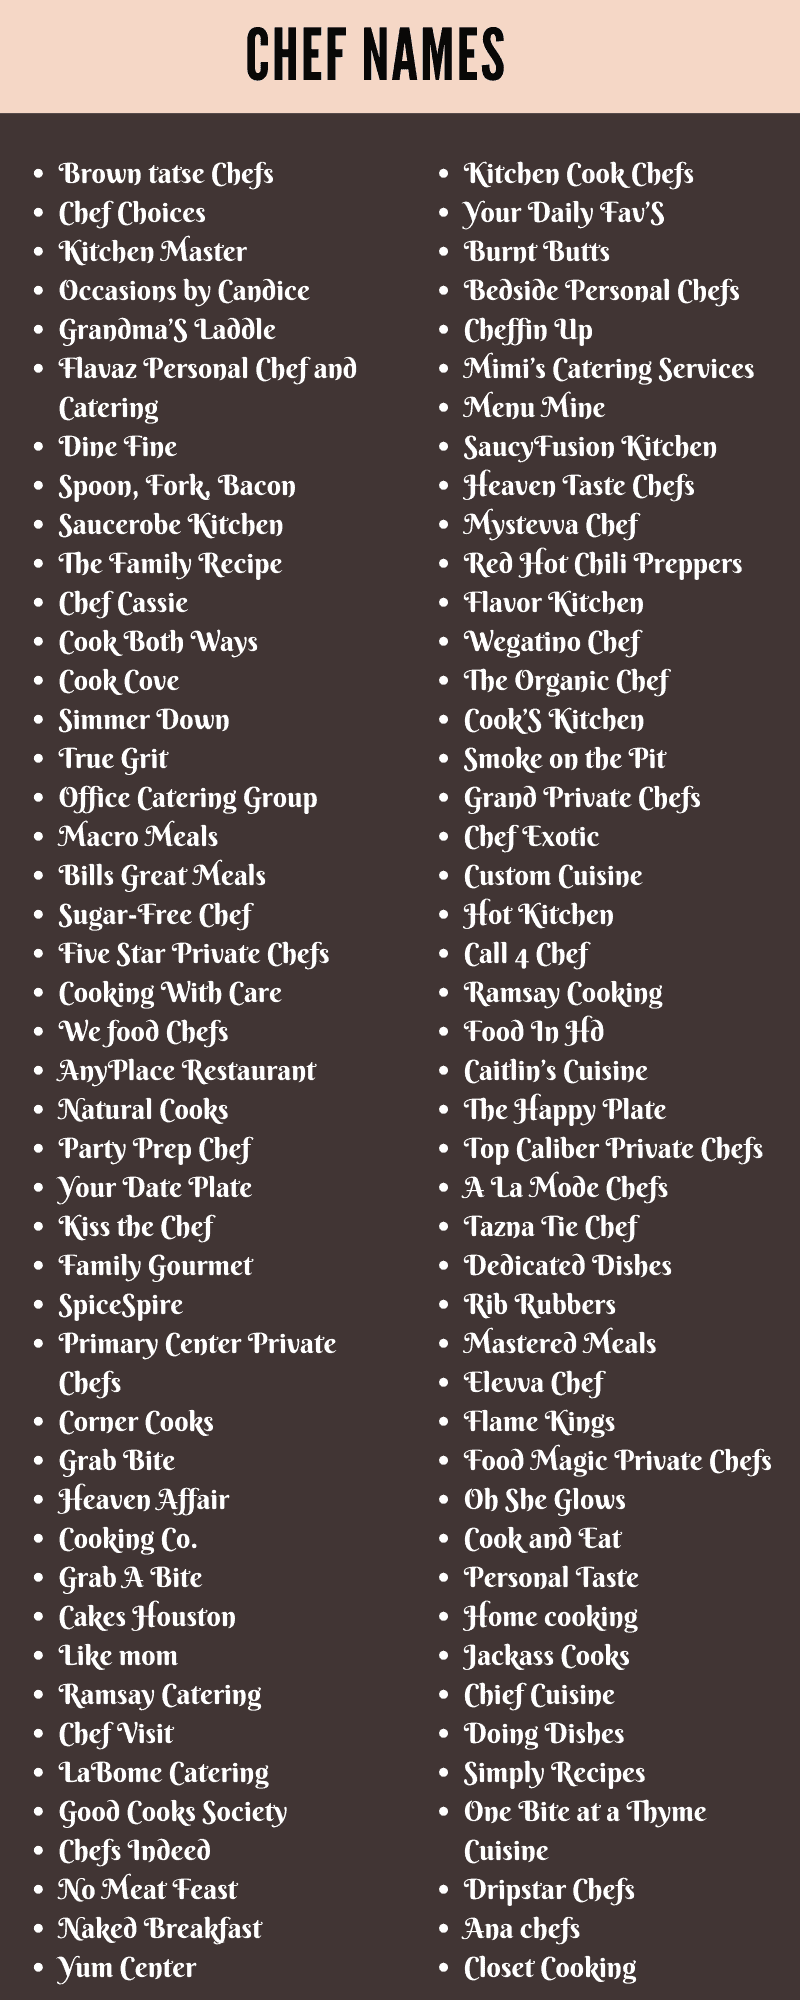 Chef Names: 400 Cool and Funny Names for Chefs